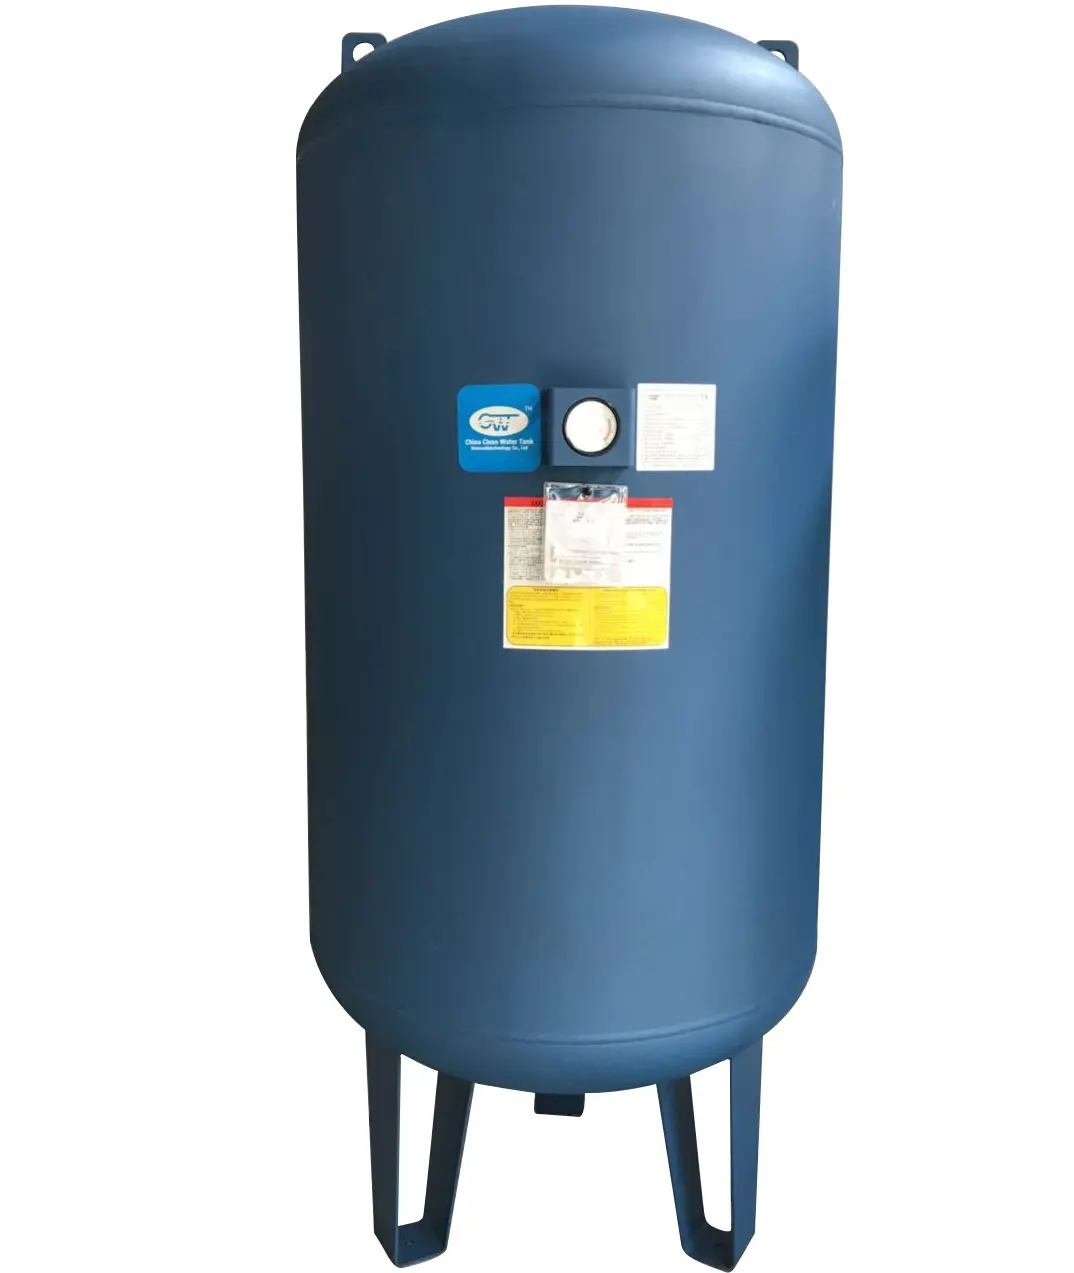 Highly cost effective water pressure tank 500 liters expansion vessel